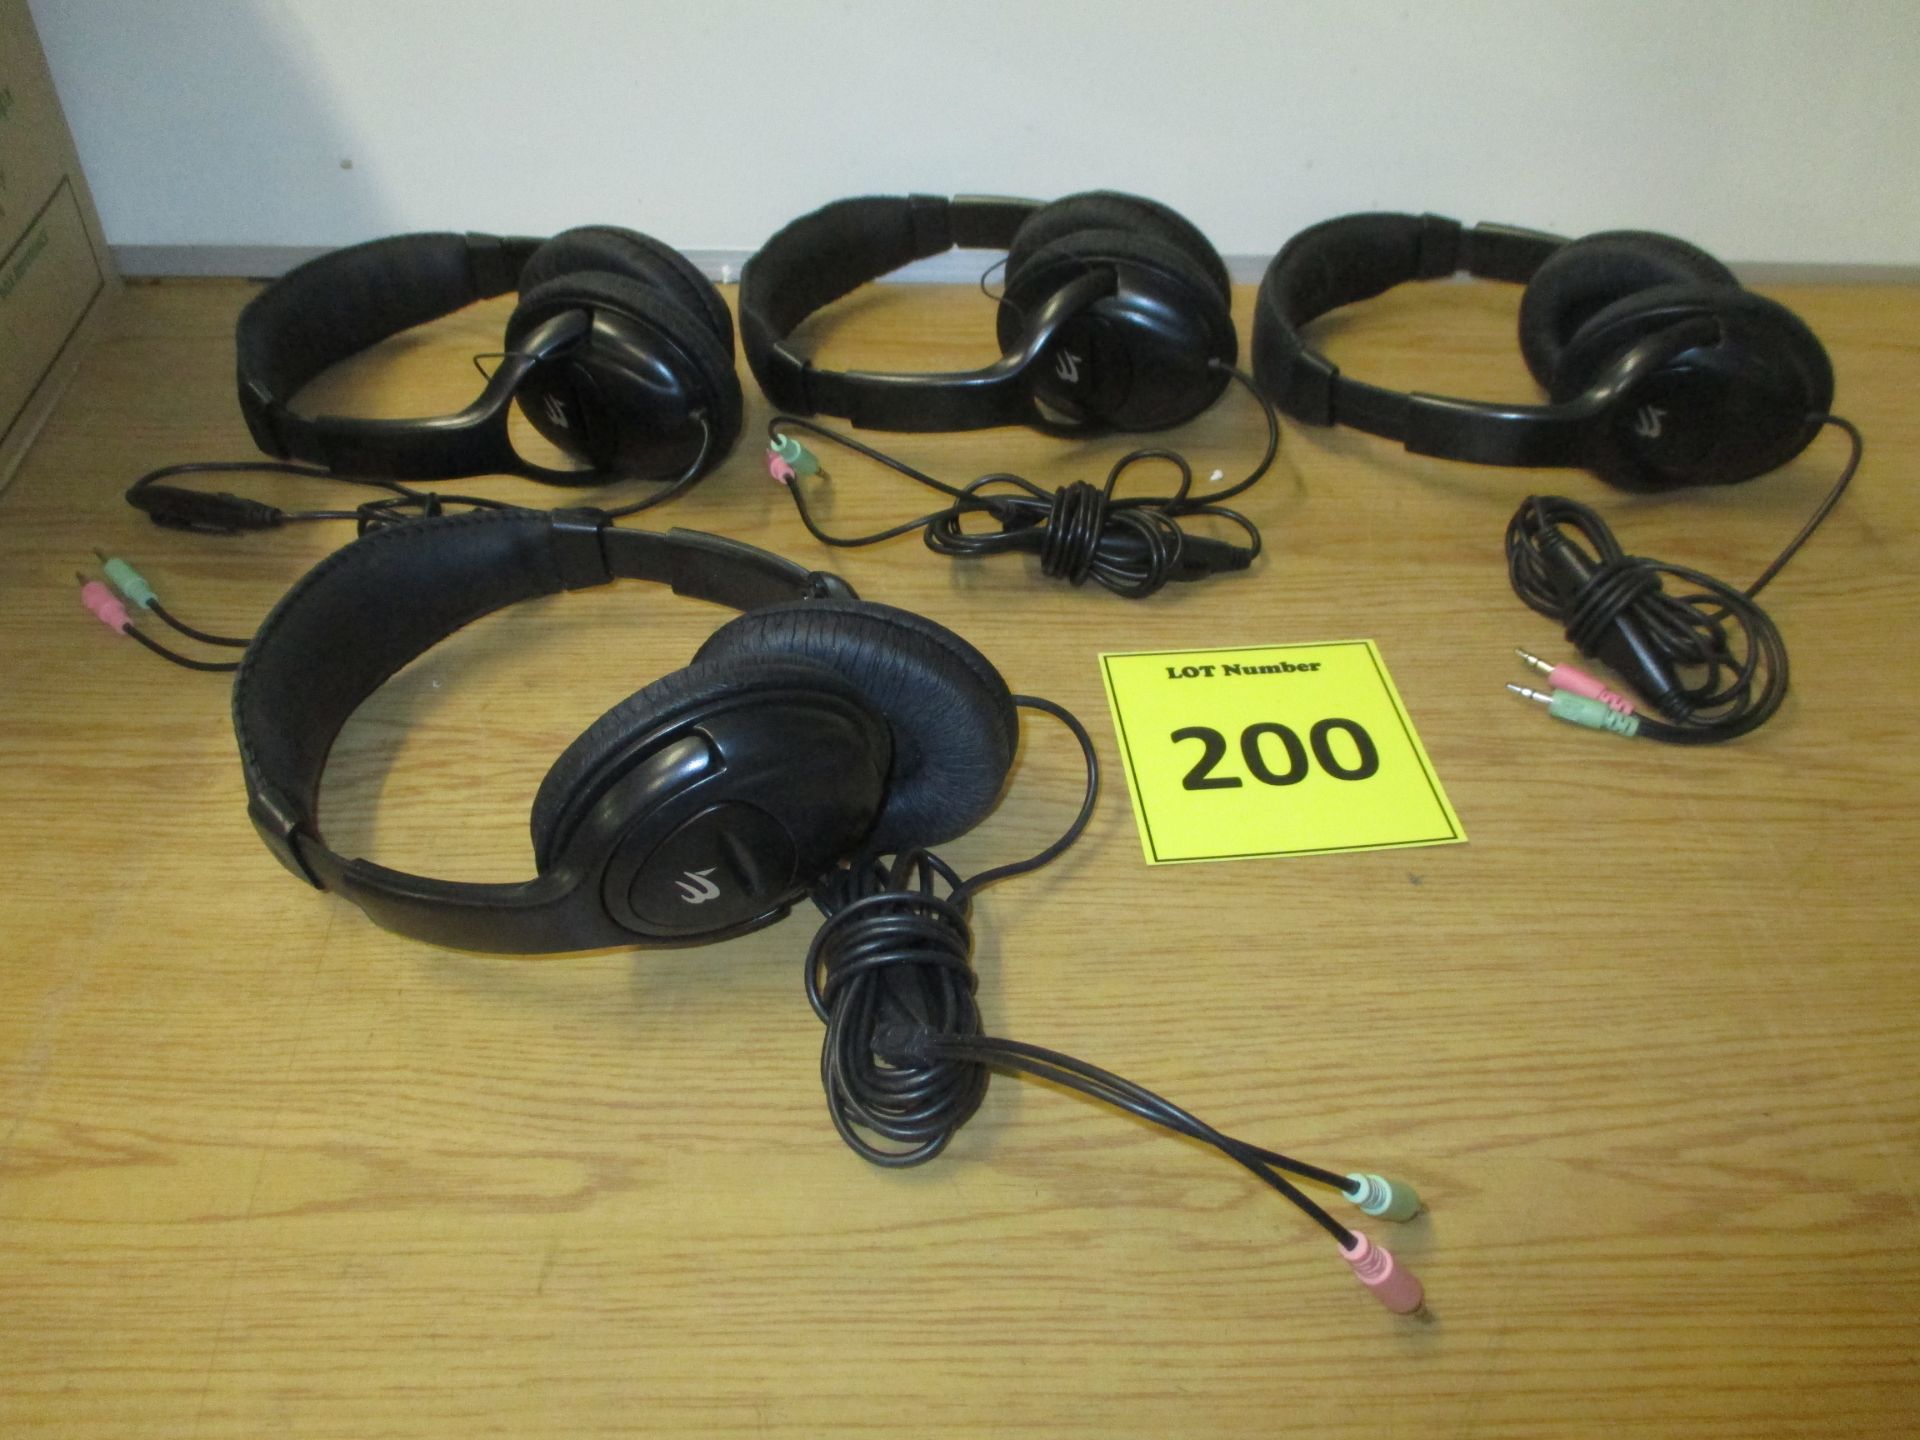 4 x padded headsets with microphones